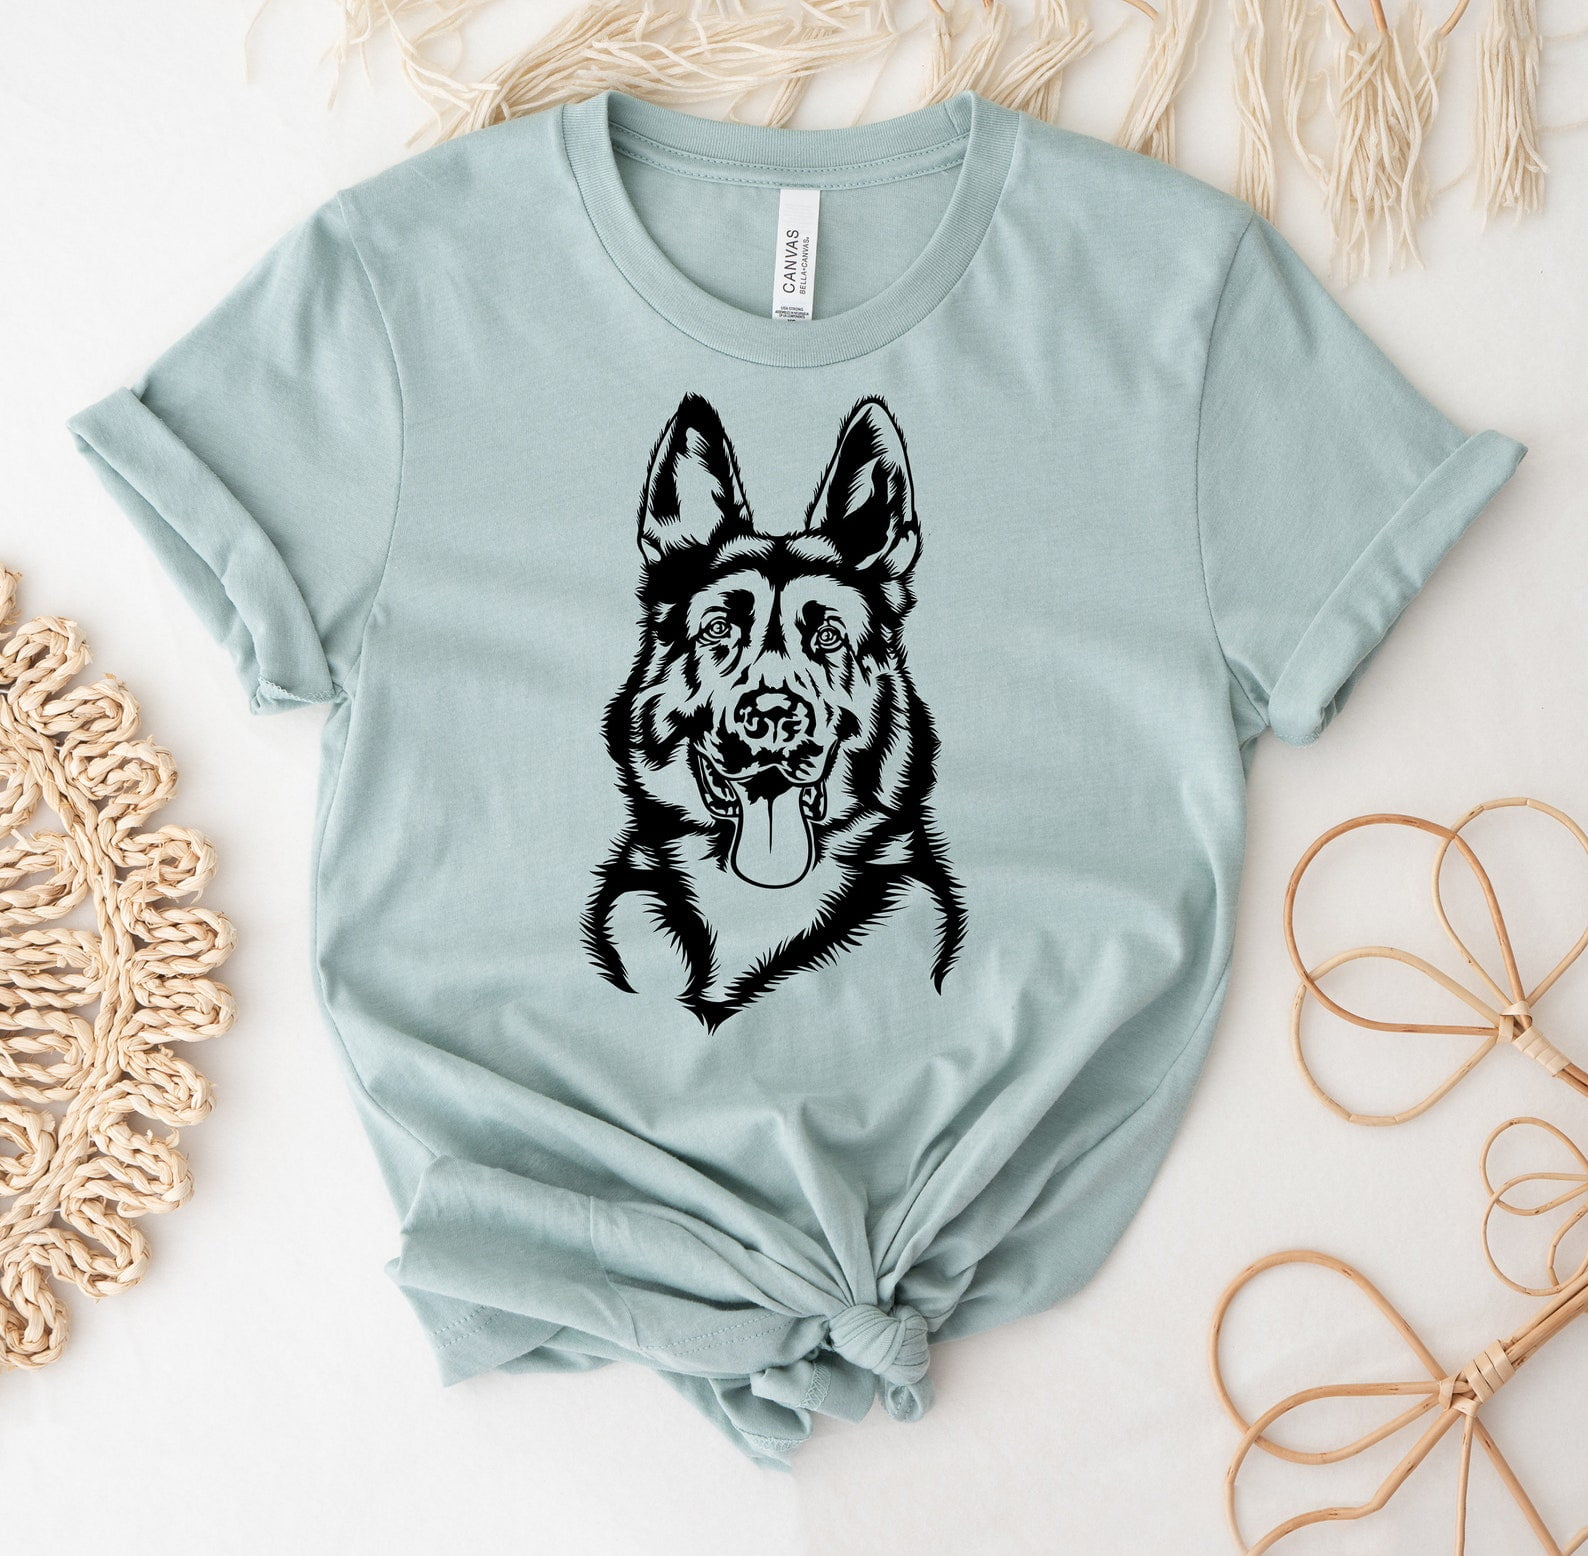 Dog Mom - Personalized Shirt - Birthday, Funny, Mother's Day Gift for Her, Woman, Girl, Dog Mom, Dog Mama, Fur Mama Women Tee / White / XL